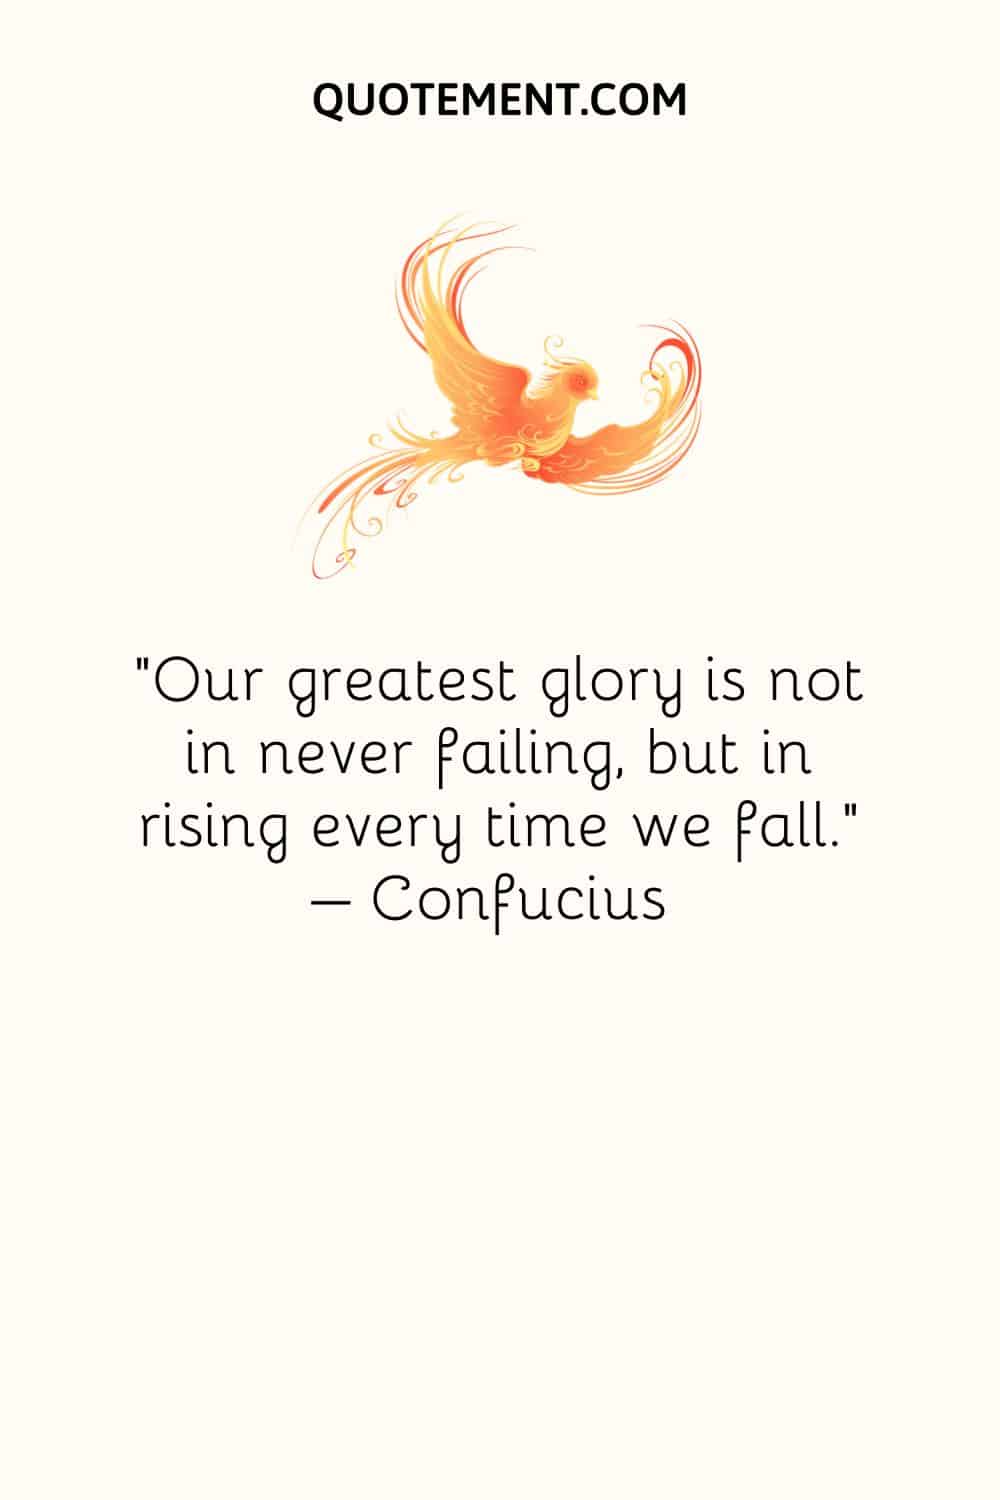 Our greatest glory is not in never failing, but in rising every time we fall.